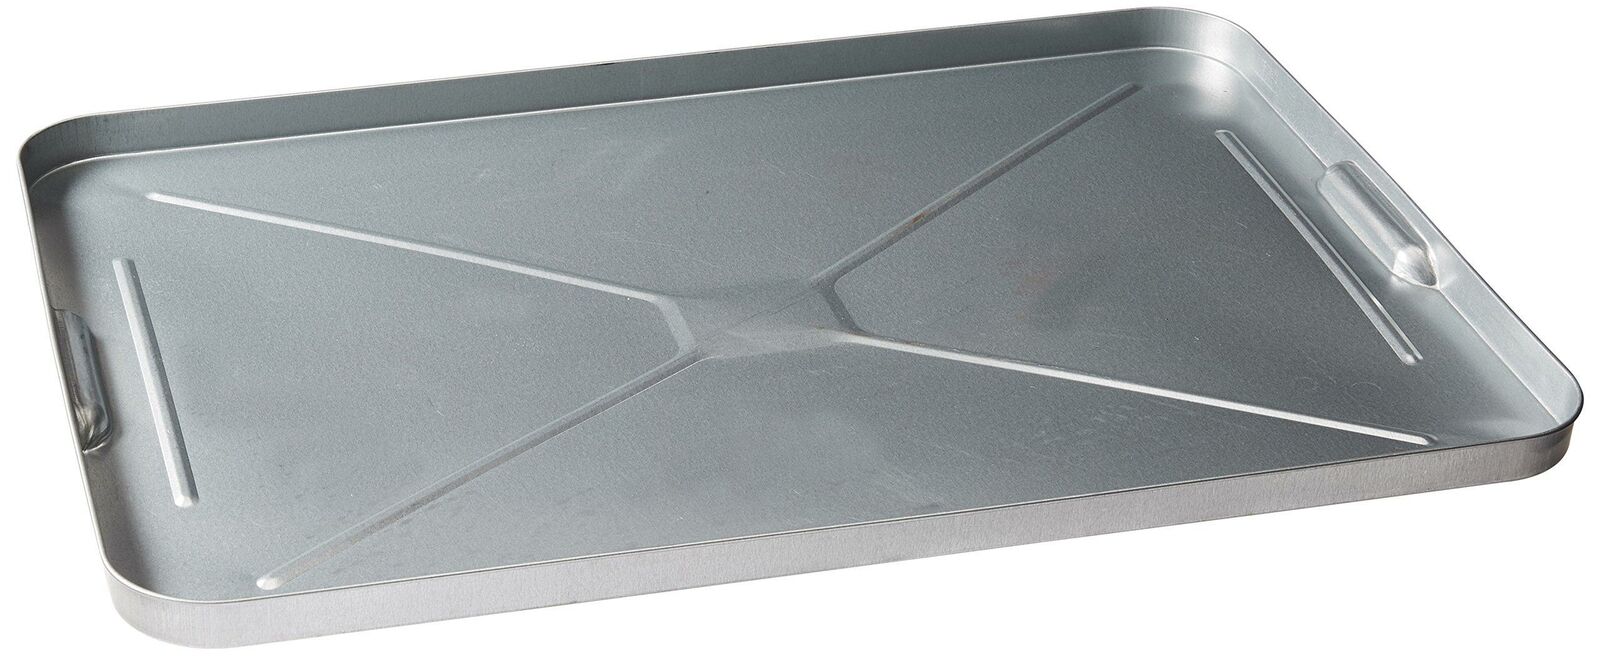 Oil Drip Pan Galvanized Tray Metal Fl Garage For Car Large Under Free shipping on posting reviews Max 67% OFF